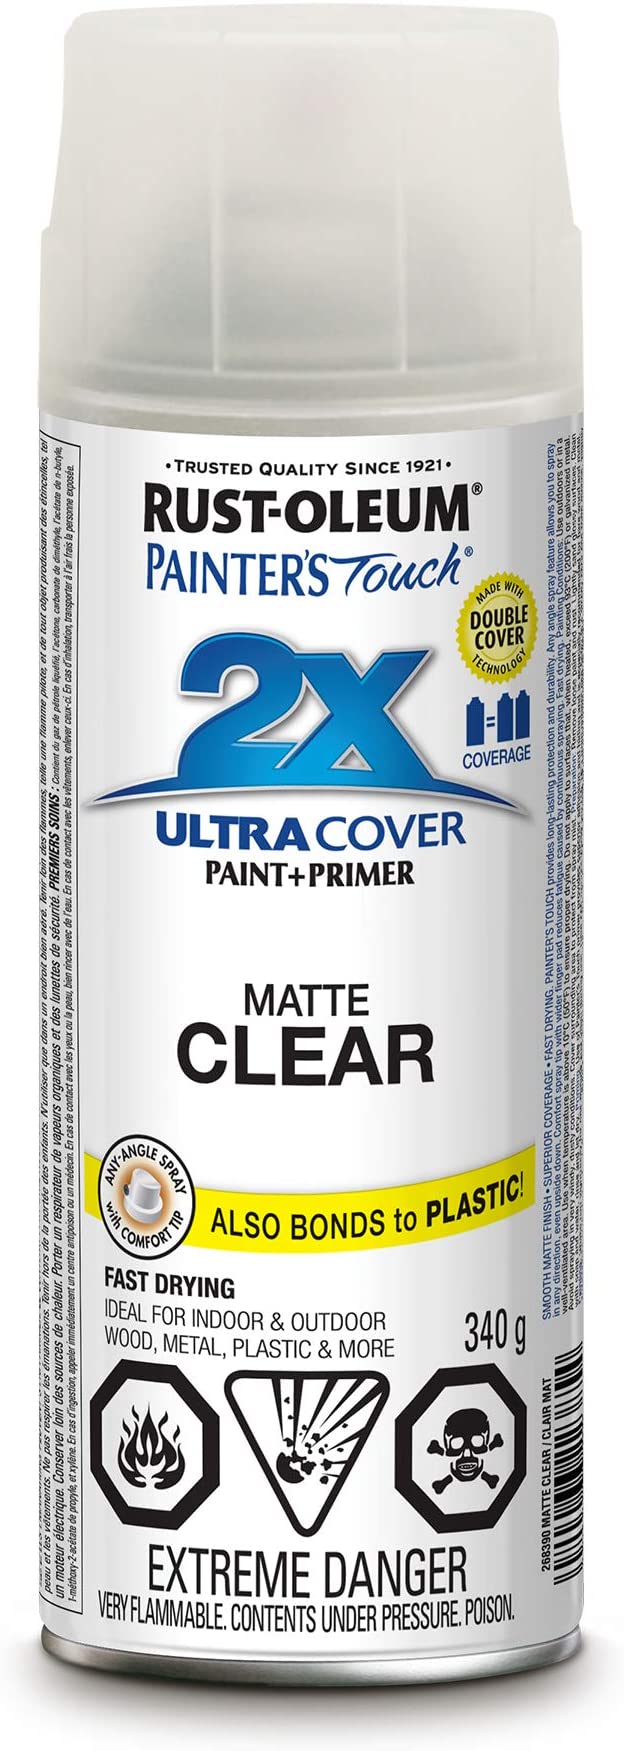 Rust-Oleum Painter's Touch 2X Ultra Cover Flat Matte in Clear, 340g